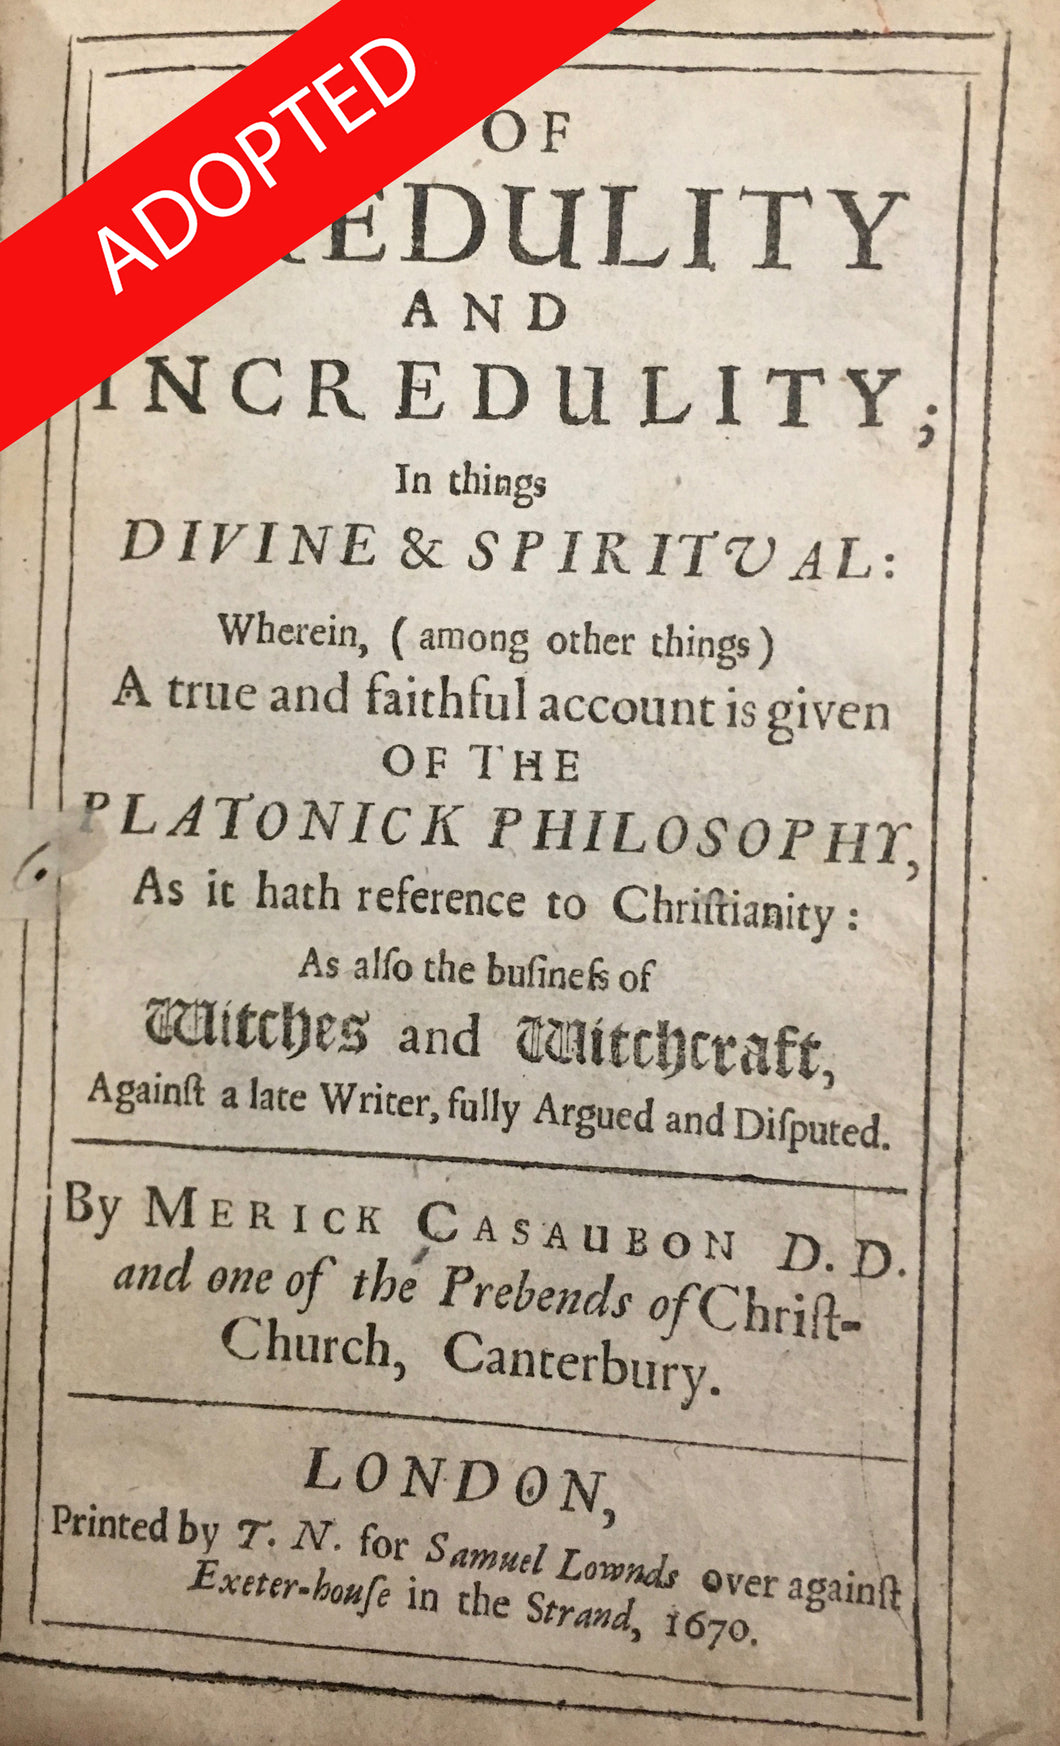 Of credulity and incredulity; in things divine & spiritual: wherein, (among other things) a true and faithful account is given of the Platonick philosophy, as it hath reference to Christianity: as also the business of witches and witchcraft....